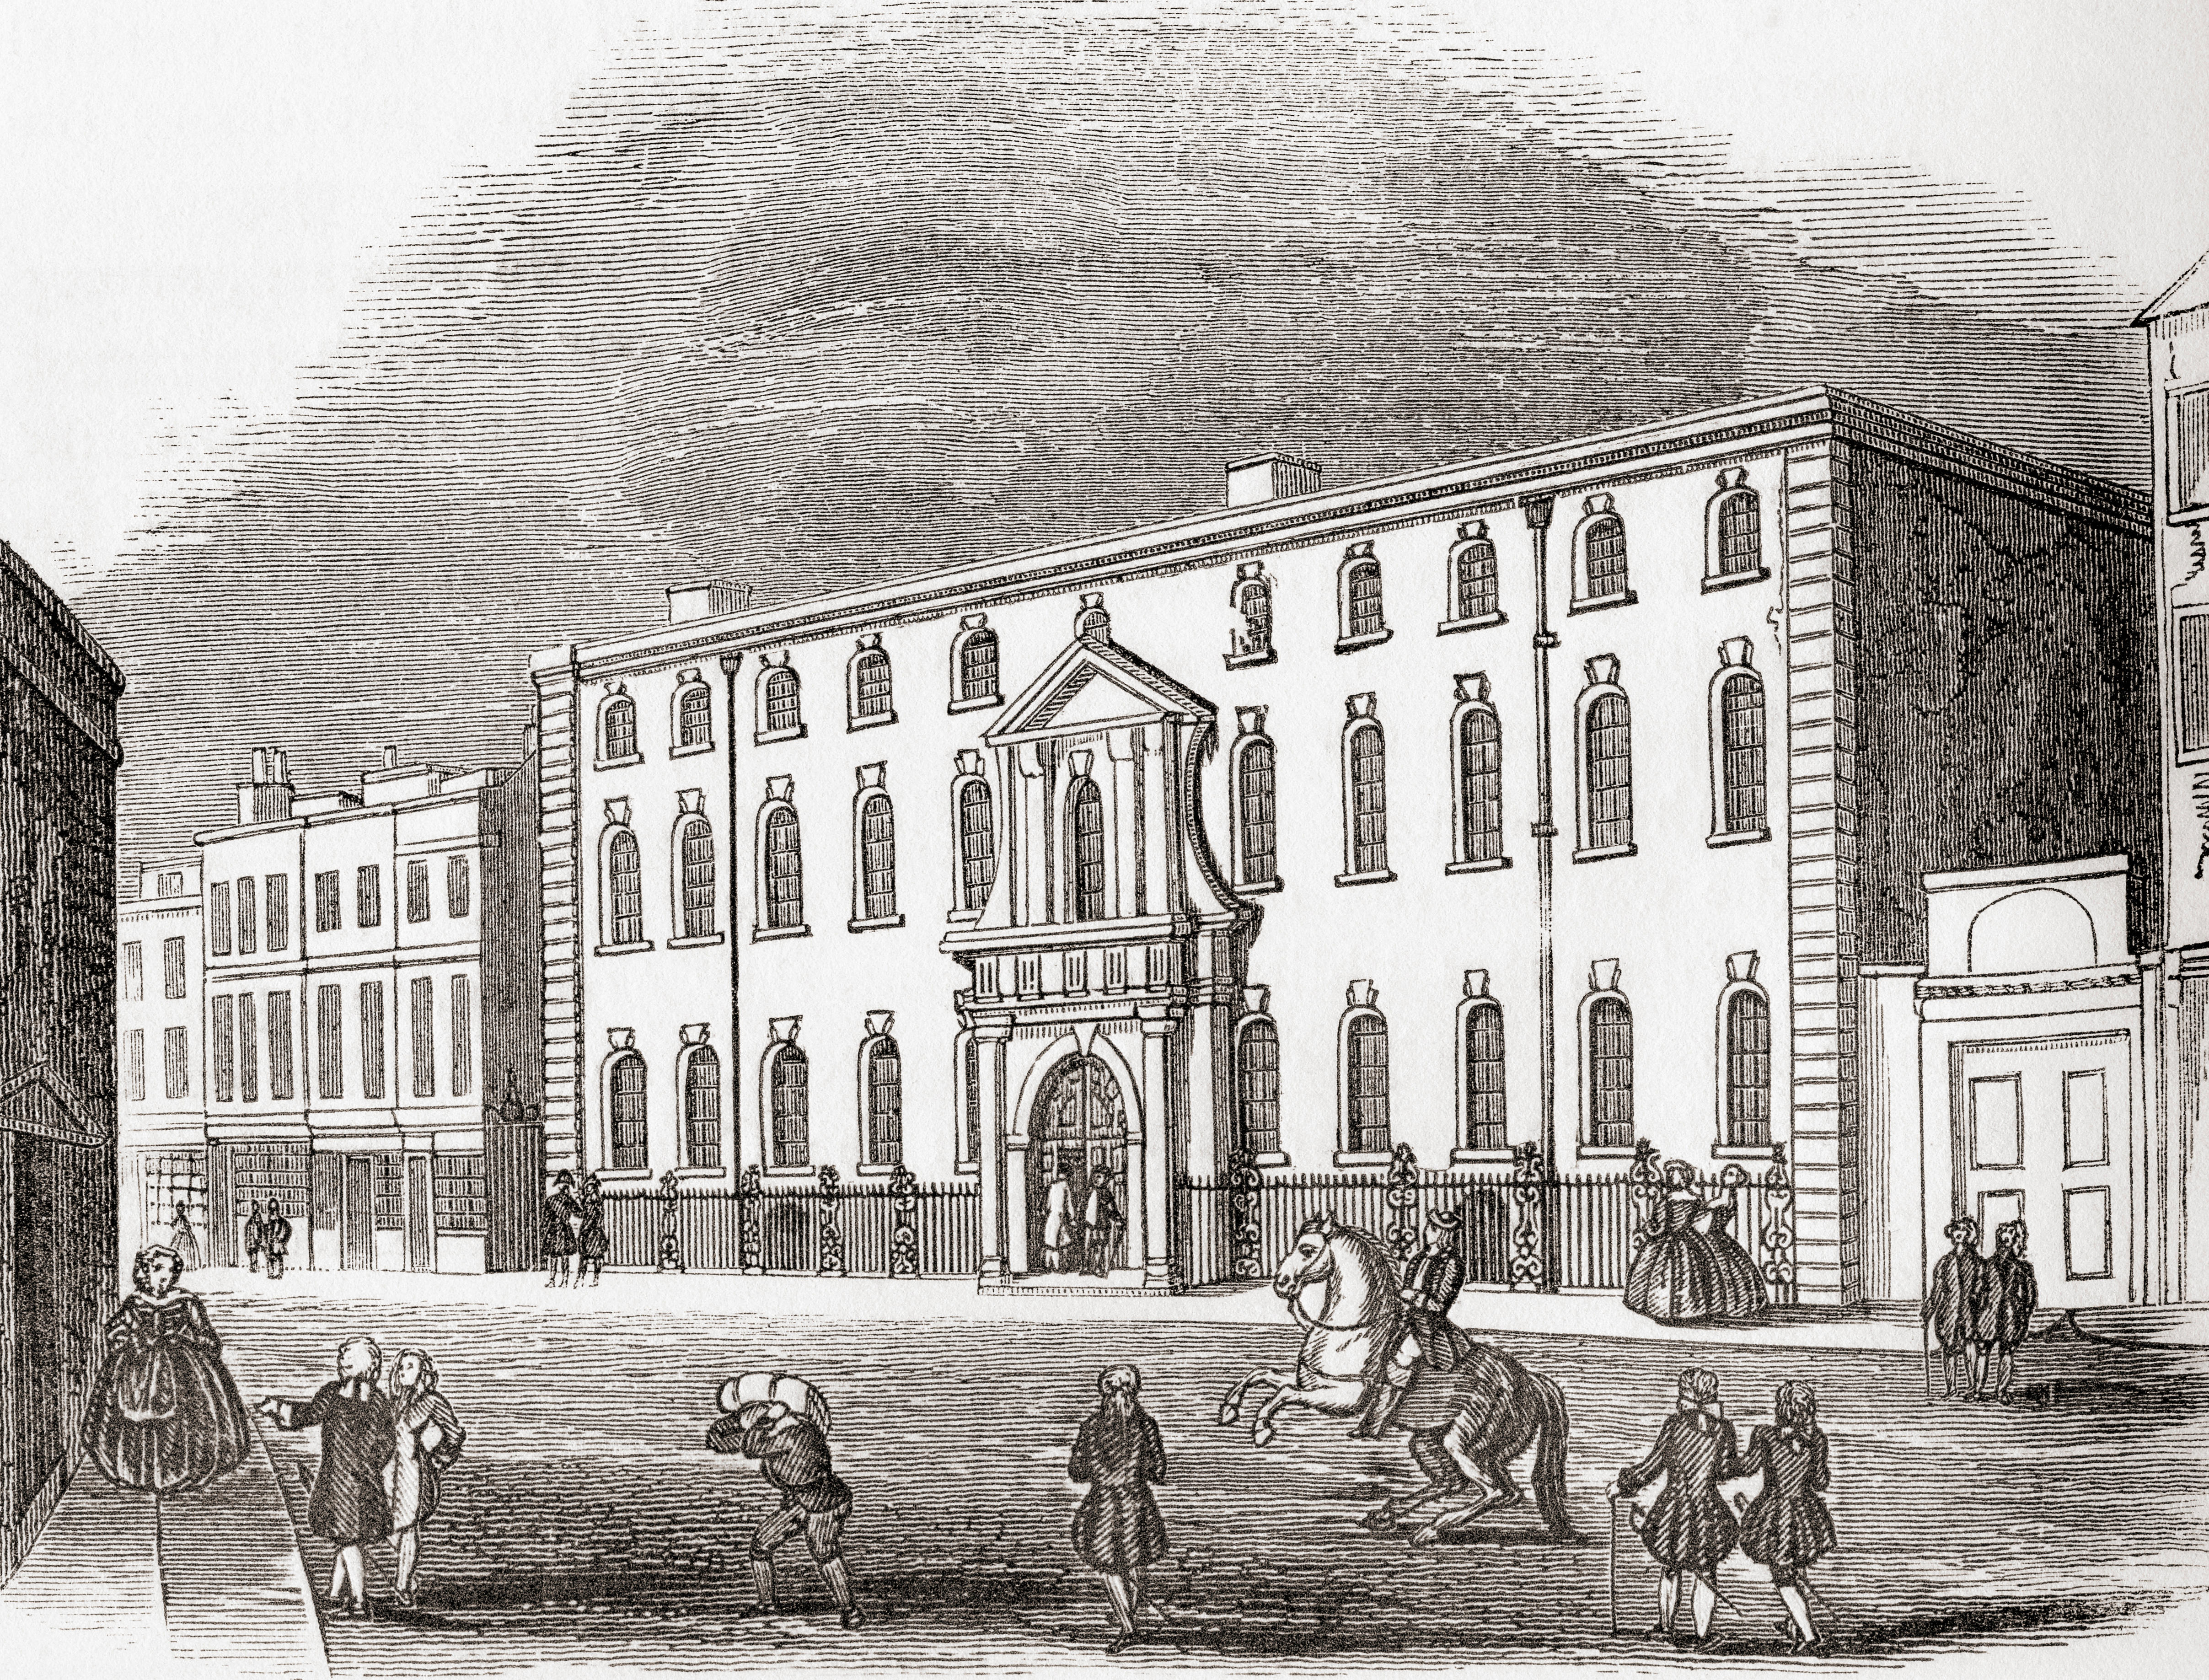 The Old South Sea House, on the corner of Bishopsgate Street and Threadneedle Street, City of London, England. Seen here in 1754 the building was the headquarters of the South Sea Company and was burned down in 1826